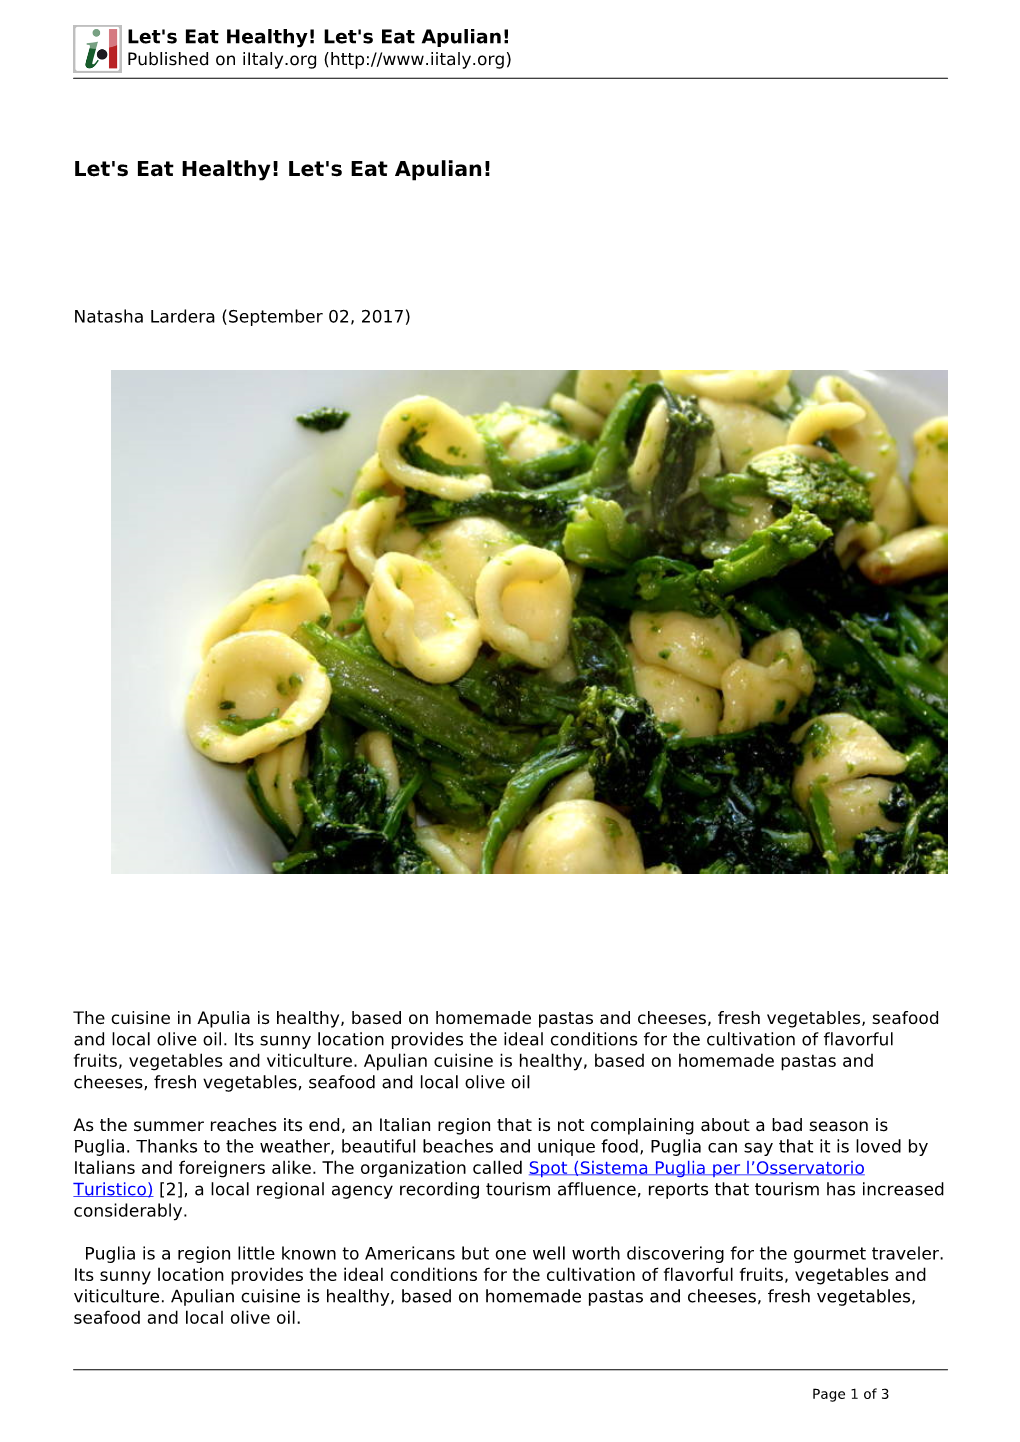 Let's Eat Healthy! Let's Eat Apulian! Published on Iitaly.Org (